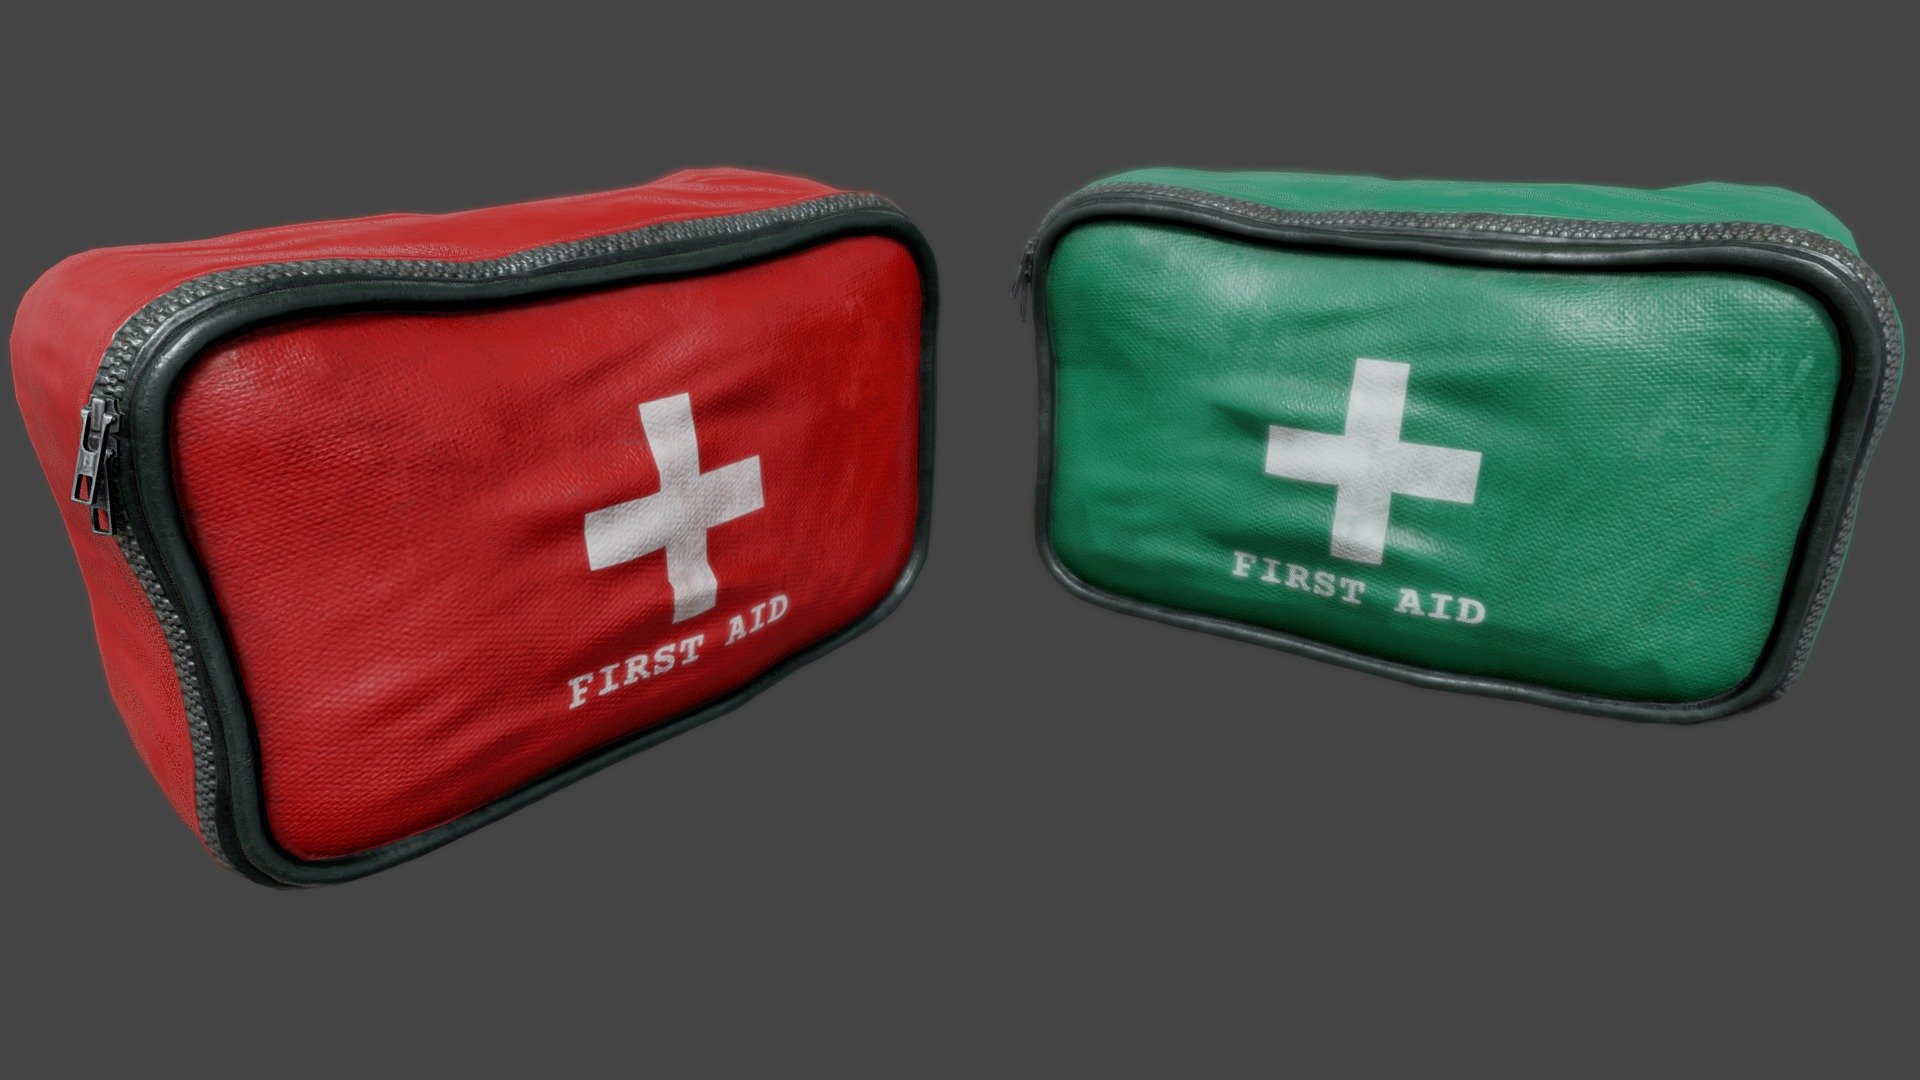 First Aid Kit PBR

Very Detailed Low Poly First Aid Kit / Bag with High-Quality PBR Texturing. 

Two Color Variations

Fits perfect for any PBR game such as First Aid og Decoration

Sculpting done in Zbrush and Retopologized, High Poly mesh Baked
and PBR Painted .

Standard Textures
Base Color, Metallic, Roughness, Height, AO, Normal, Maps

Unreal 4 Textures
Base Color, Normal, OcclusionRoughnessMetallic

Unity 5/2017 Textures
Albedo, SpecularSmoothness, Normal, and AO Maps

4096x4096 TGA Textures

Please Note, this PBR Textures Only. 

Low Poly Triangles 

2870 Tris
1469 Verts

File Formats :

.Max2018
.Max2017
.Max2016
.Max2015
.FBX
.OBJ
.3DS
.DAE - First Aid Kit PBR - Buy Royalty Free 3D model by GamePoly (@triix3d) 3d model